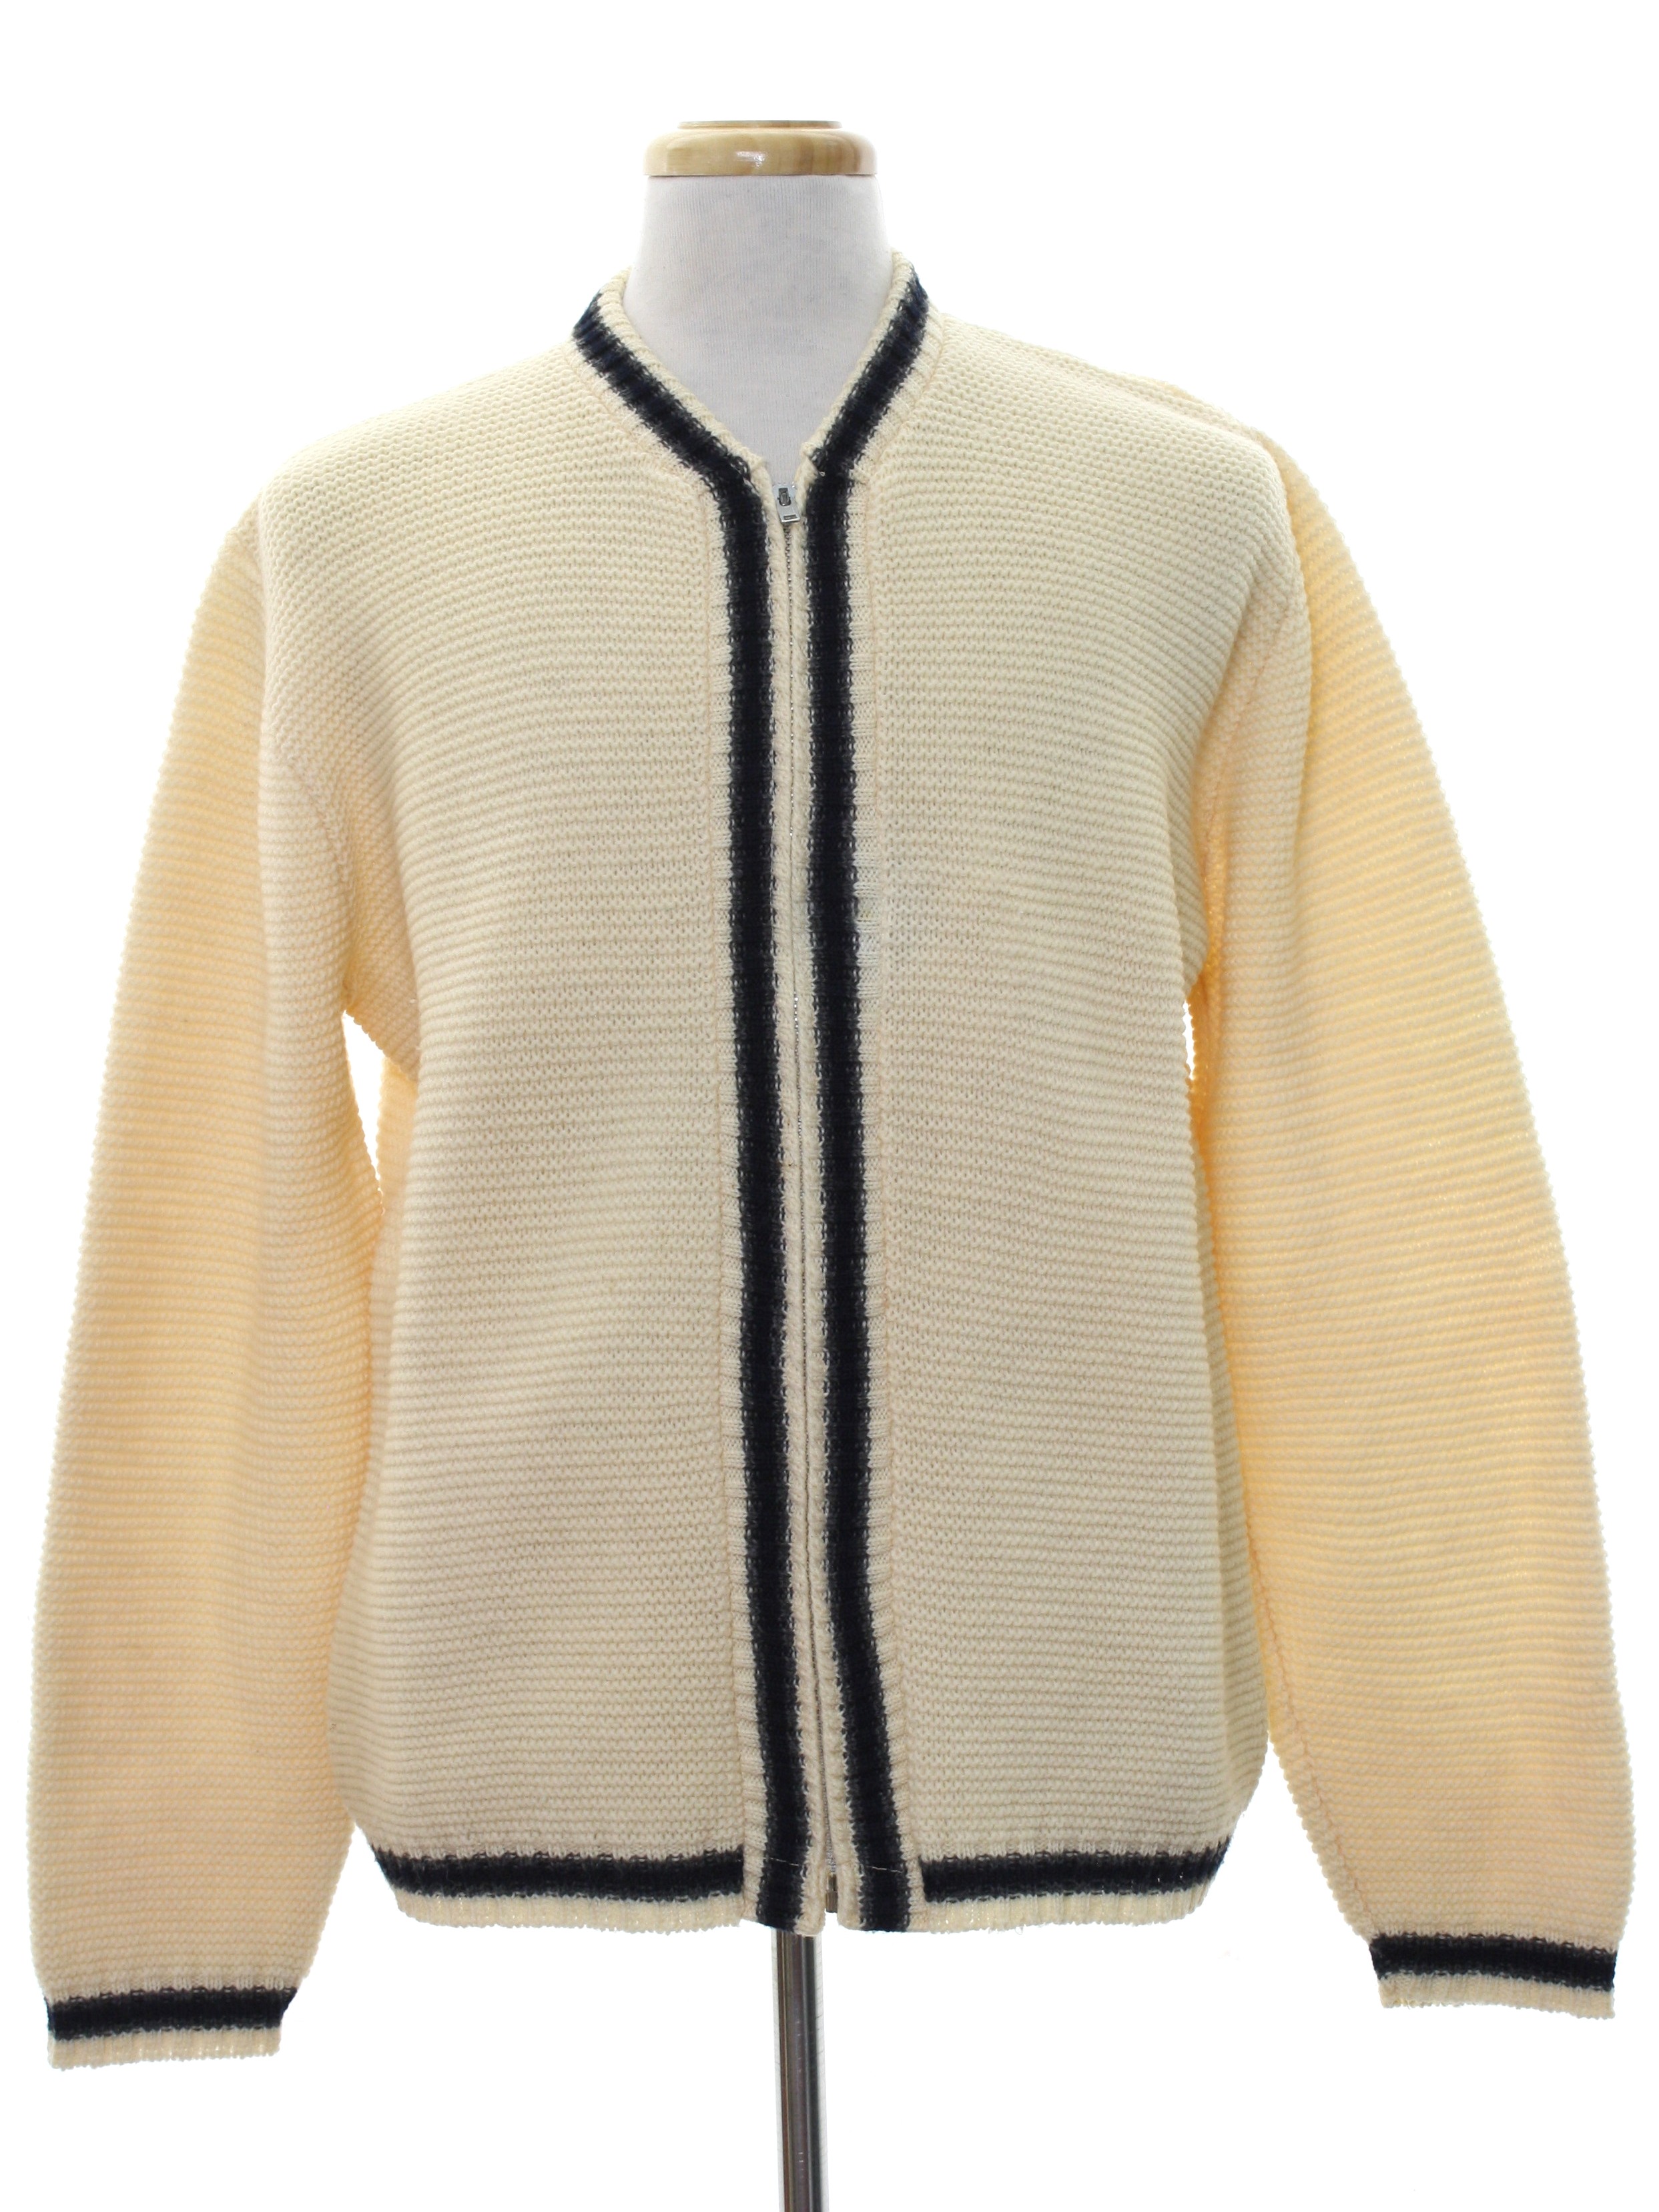 Vintage 1950's Sweater: 50s -Label Missing- Mens ivory acrylic knit ...